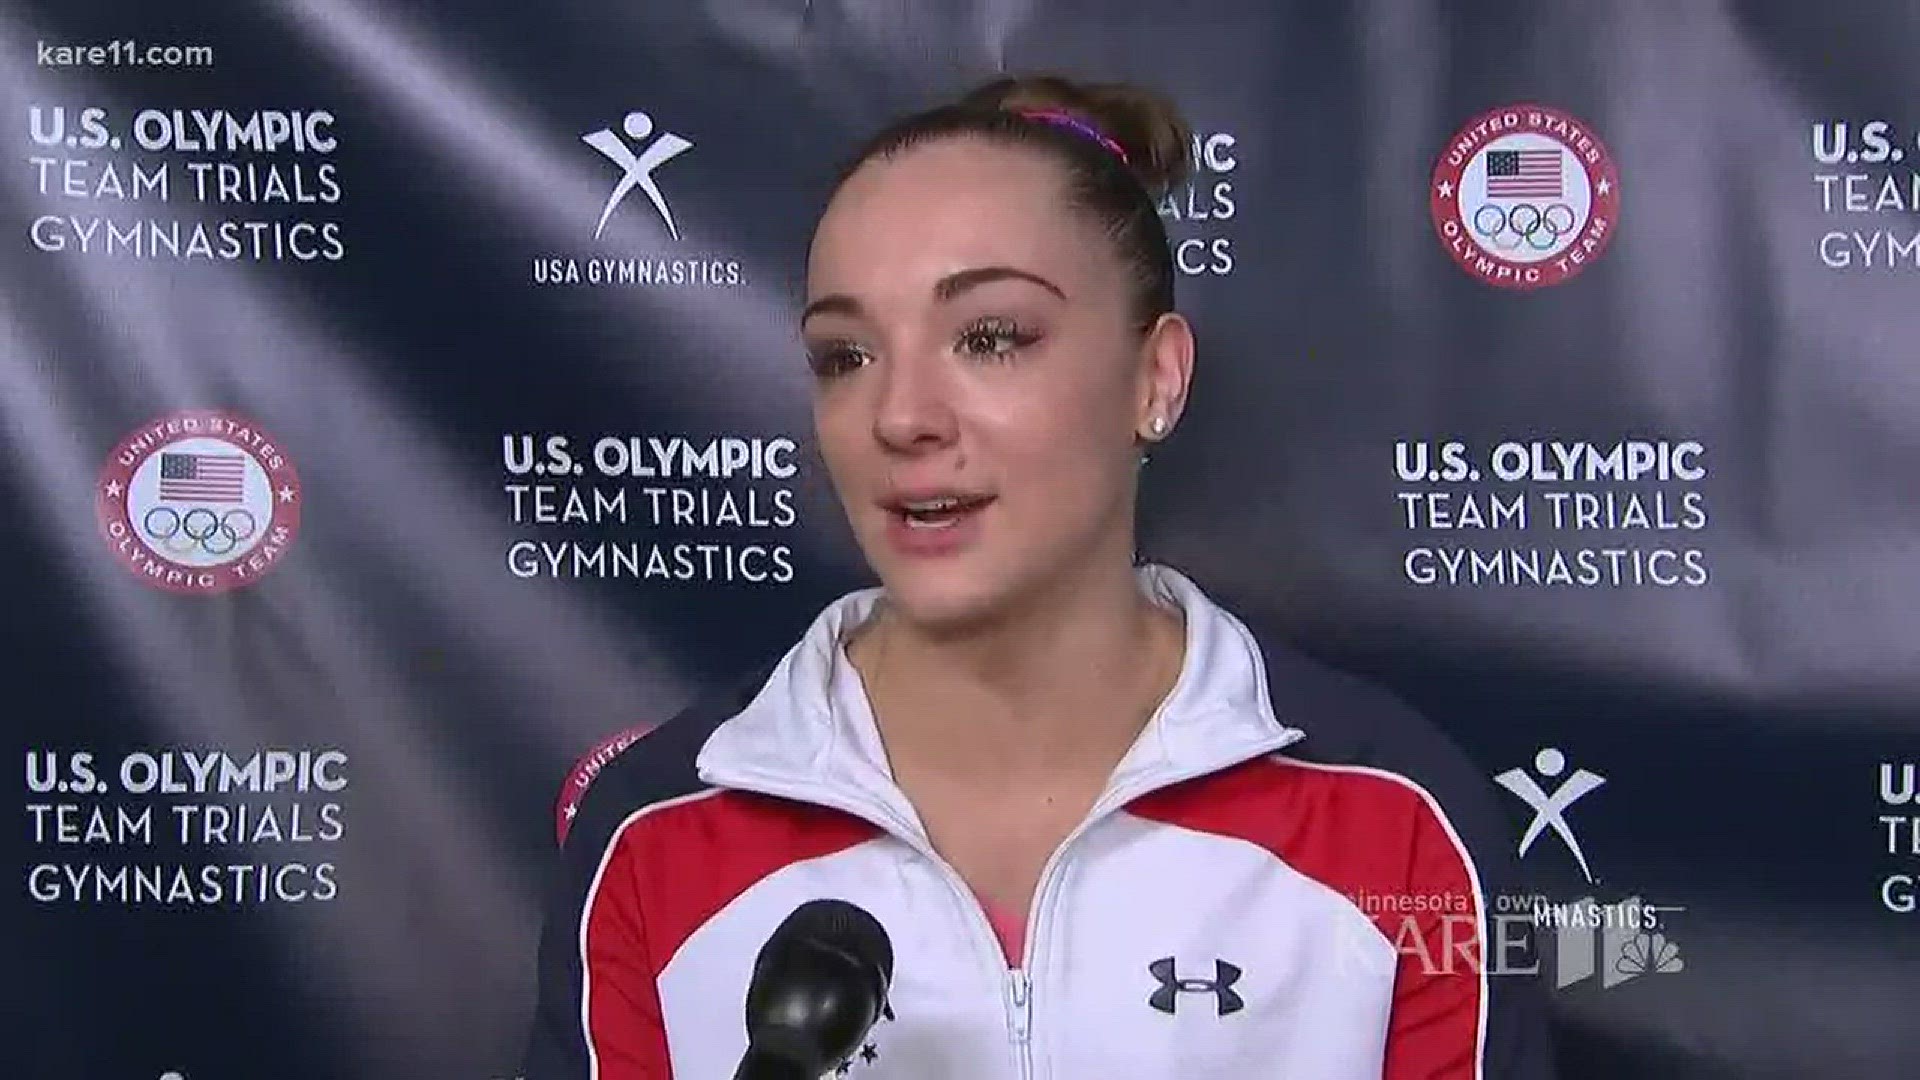 Little Canada native Maggie Nichols says she was molested by USA Gymnastics team doctor Larry Nassar while a member of the national team. http://kare11.tv/2AI0LE9